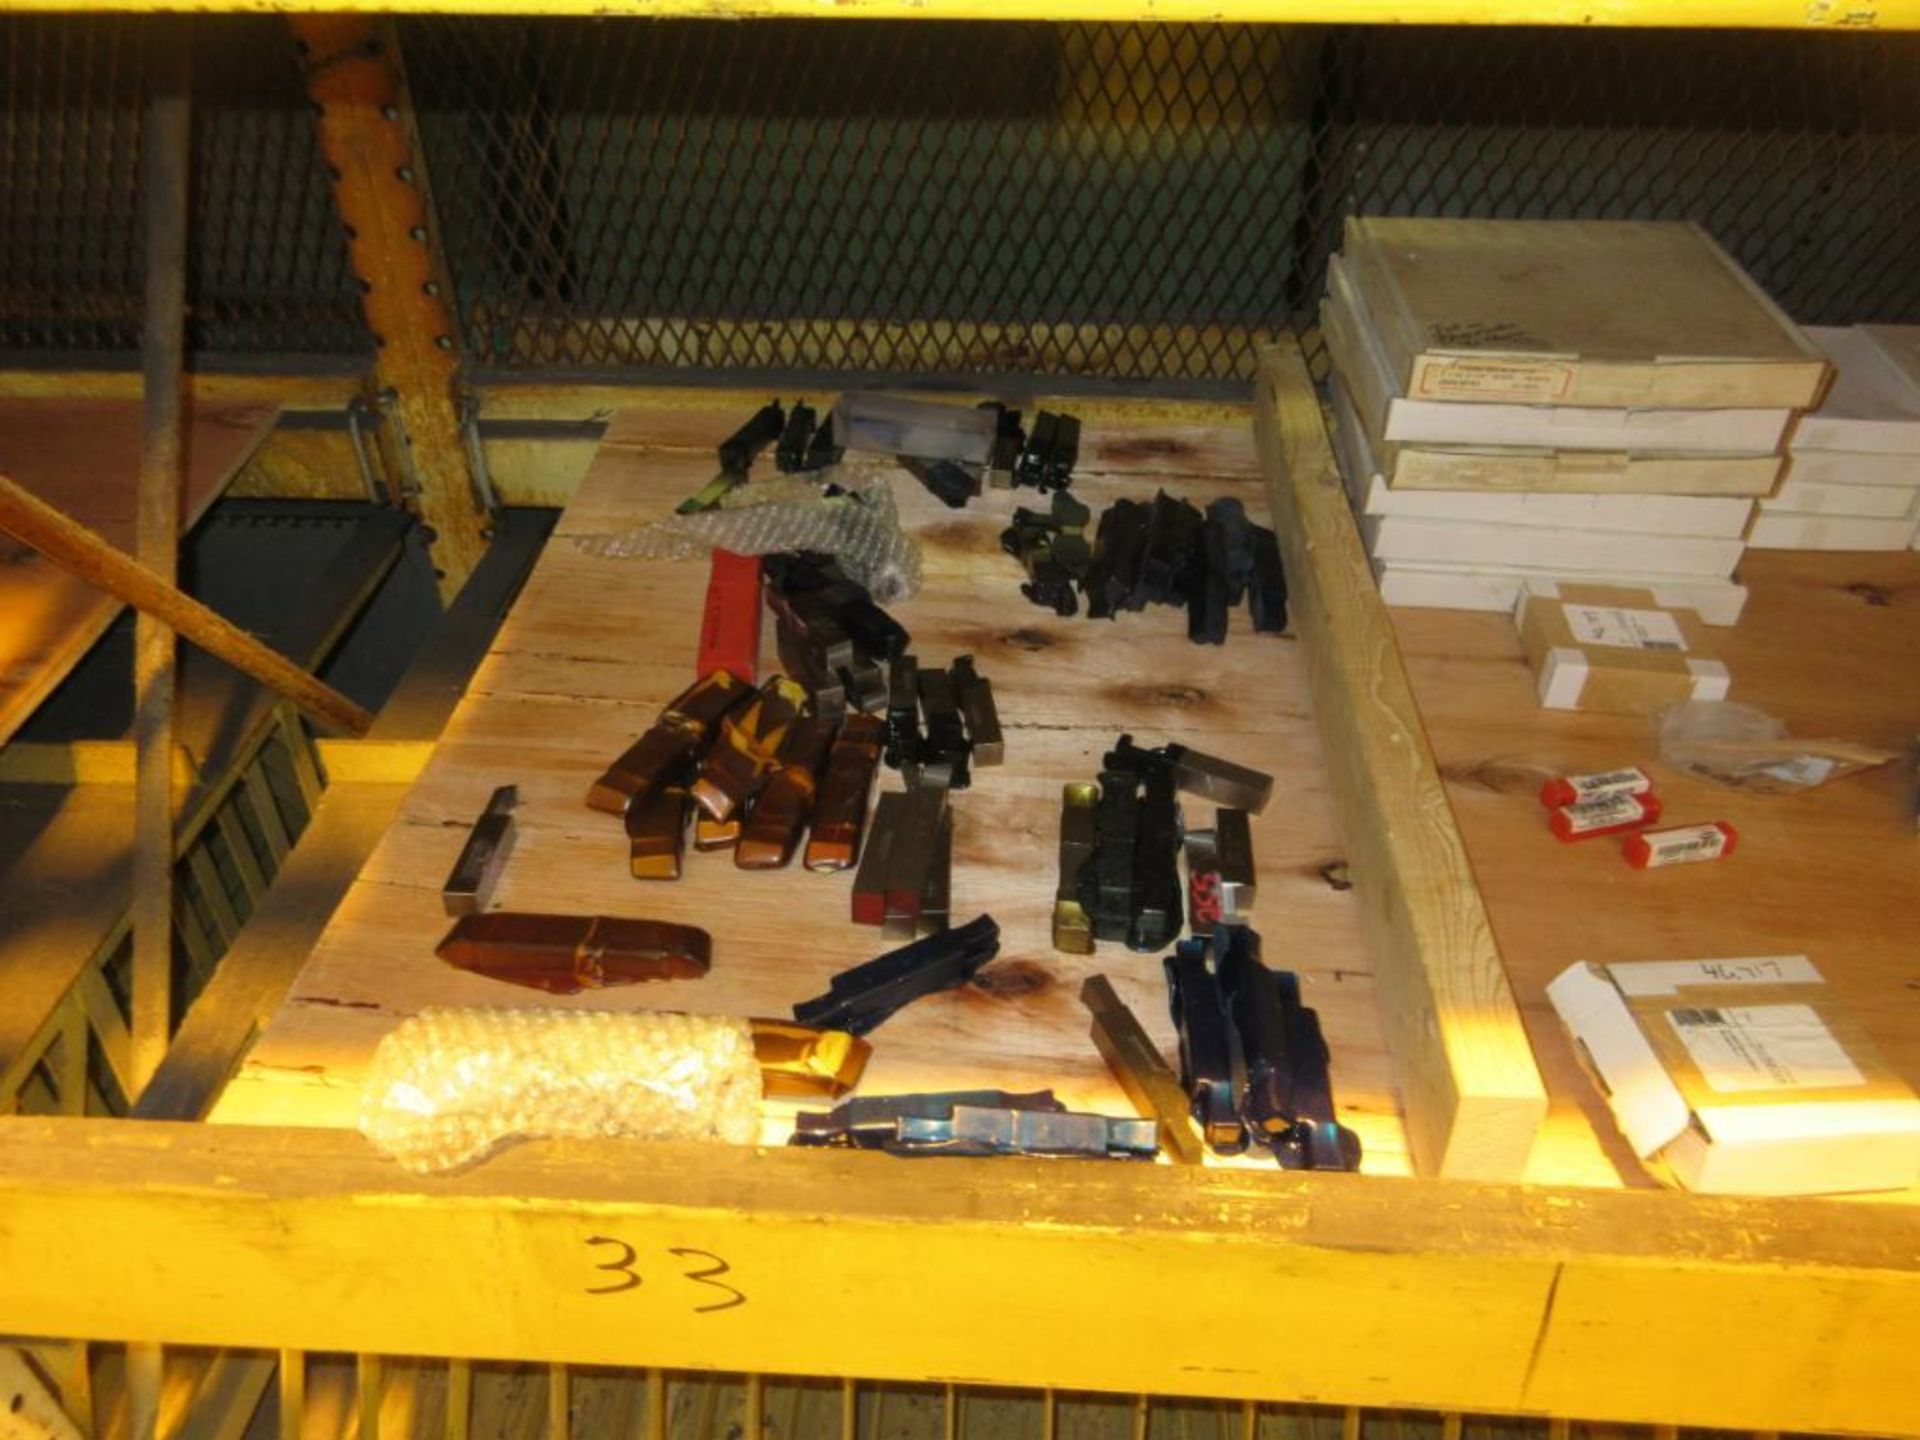 CONTENTS OF (22) SECTIONS PALLET RACK: ASSORTED ABRASIVES, SUNNEN STONES, TOOL BITS, DOVETAIL CUTTER - Image 10 of 43